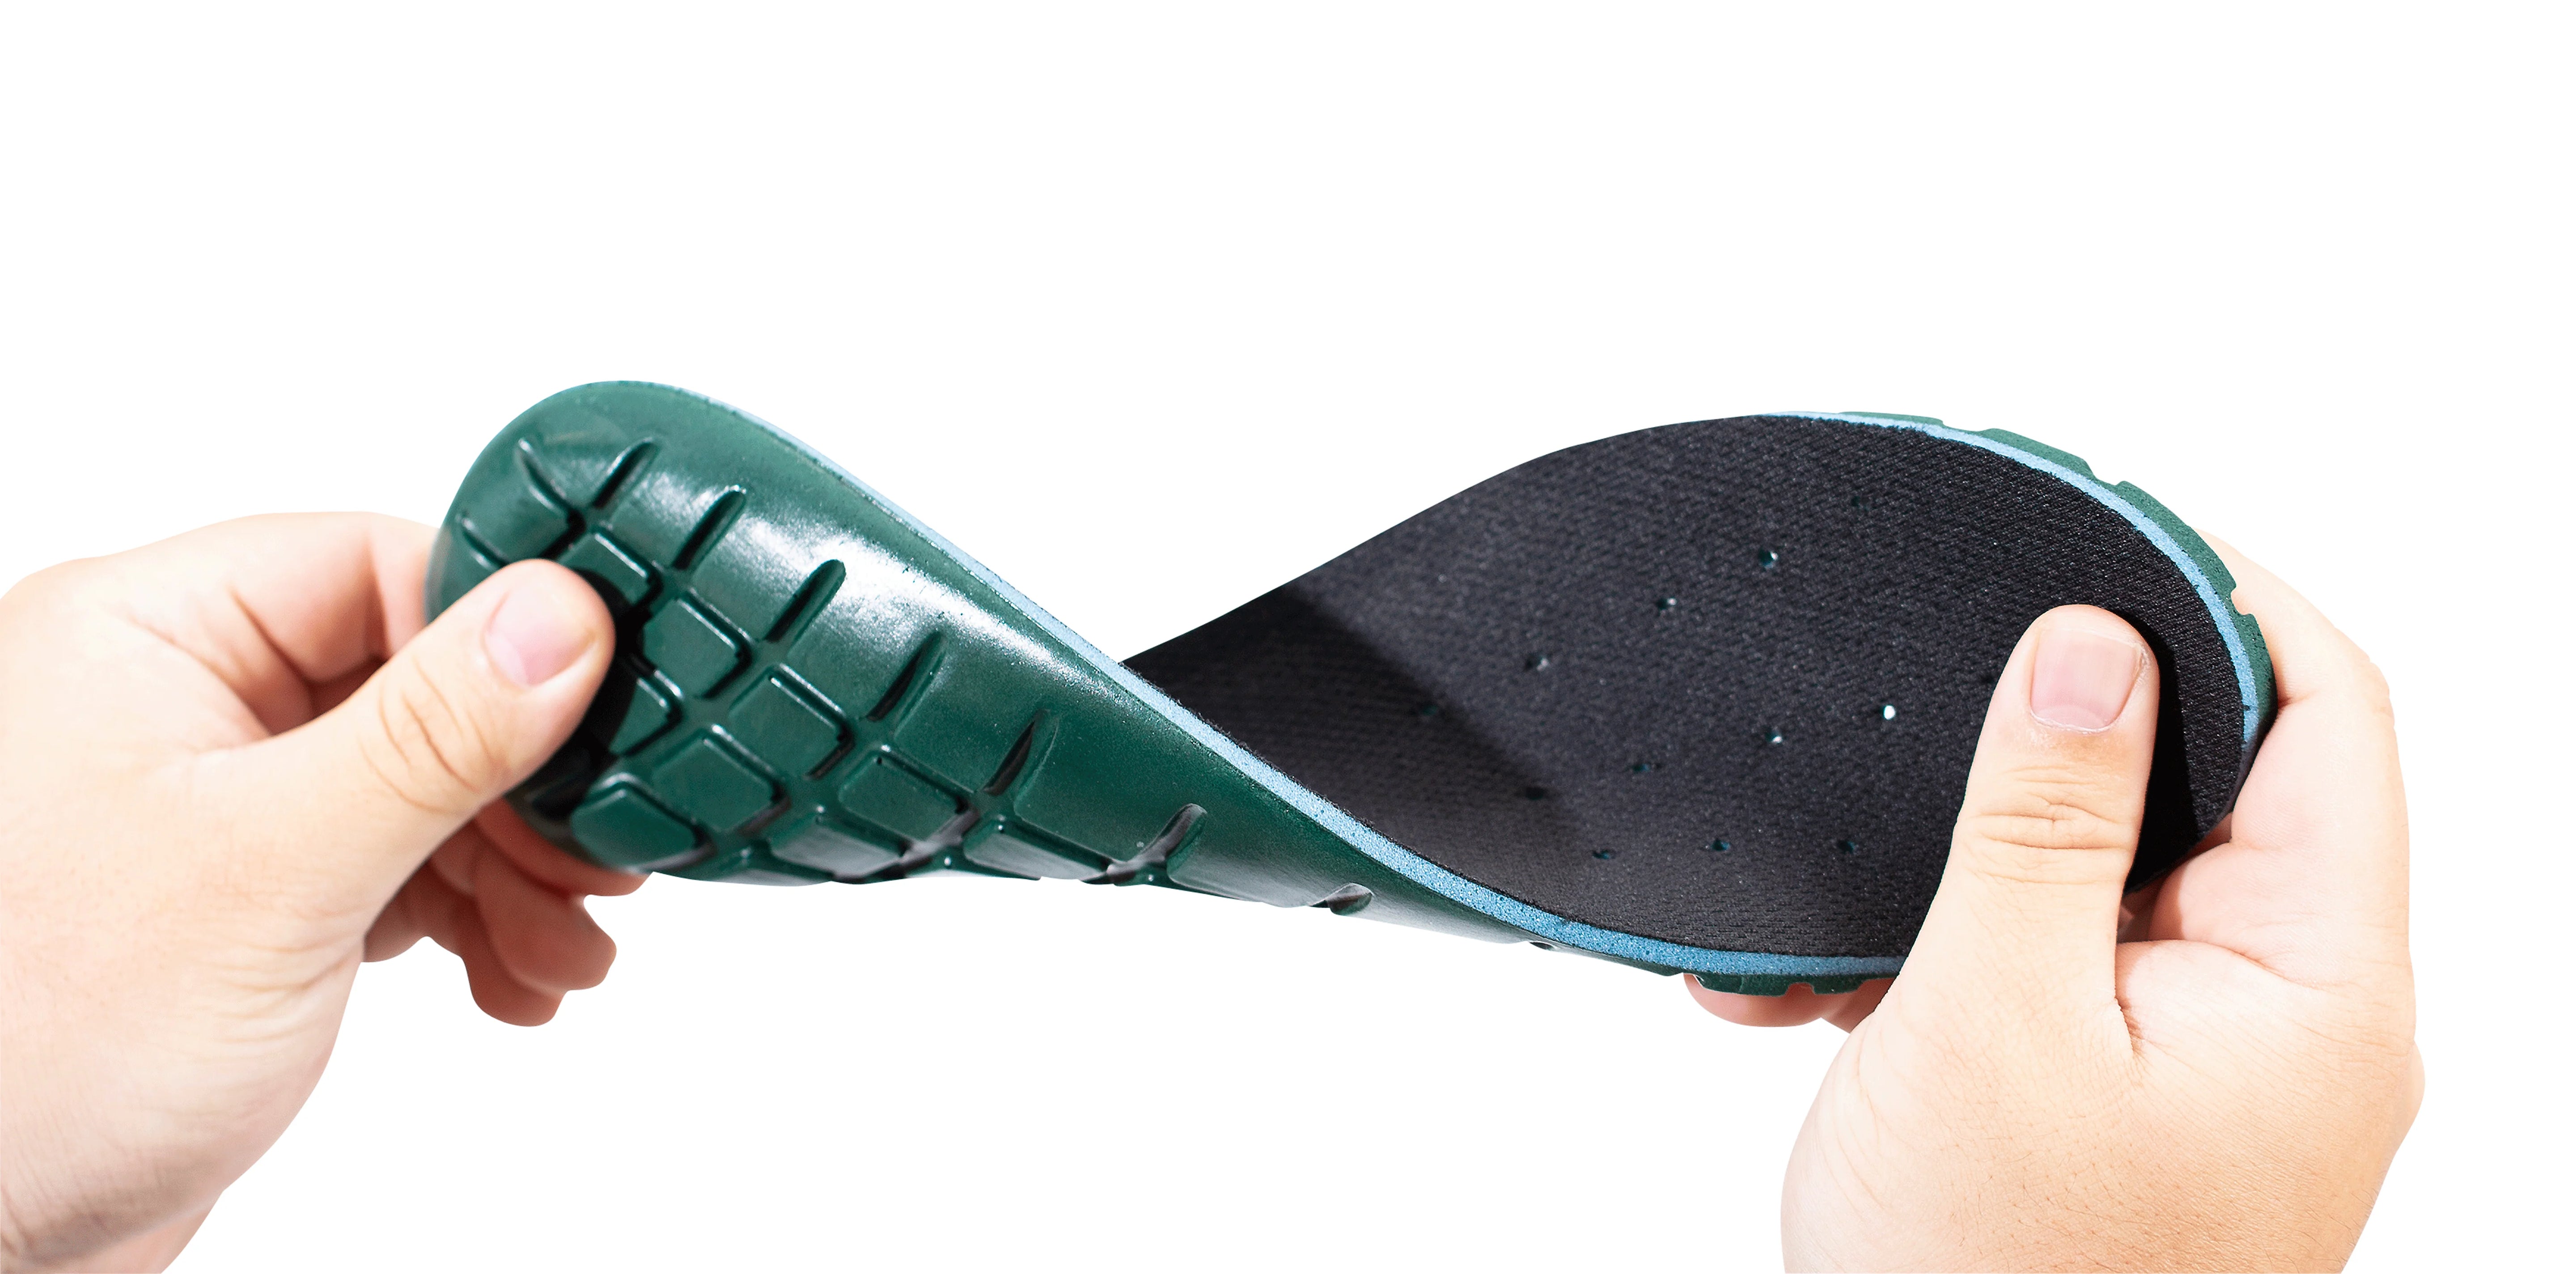 MUCK BOOT INSOLES EXPLAINED